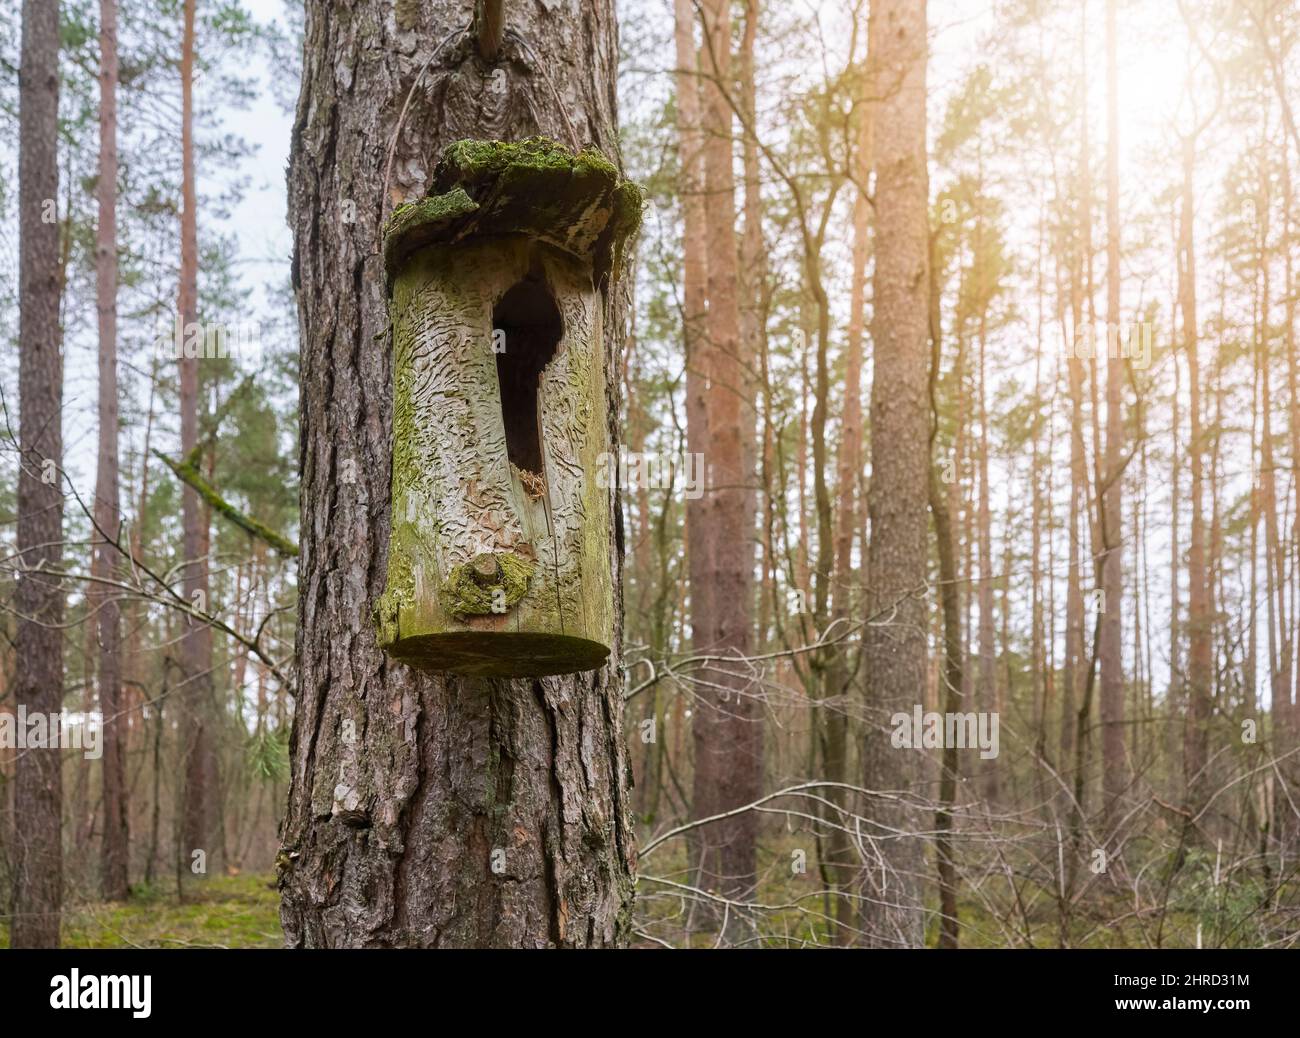 Close up picture of a wooden birdhouse in a forest, selective focus. Stock Photo